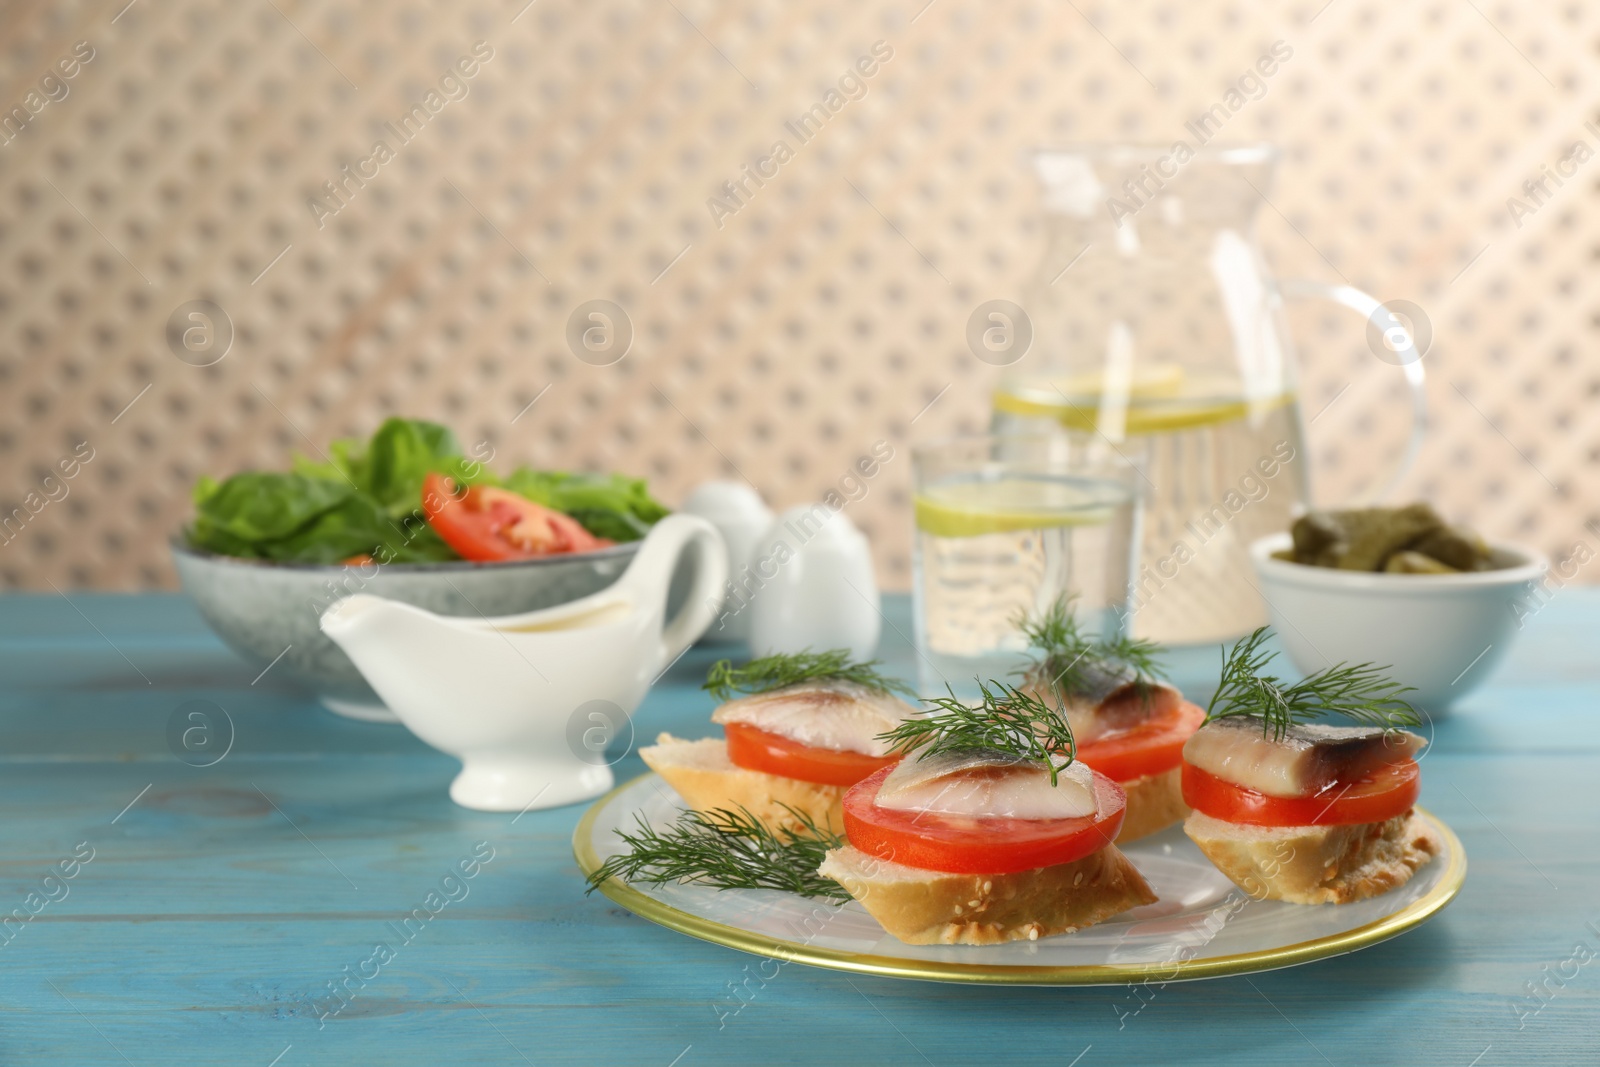 Photo of Delicious sandwiches with salted herring, tomatoes and dill on light blue wooden table